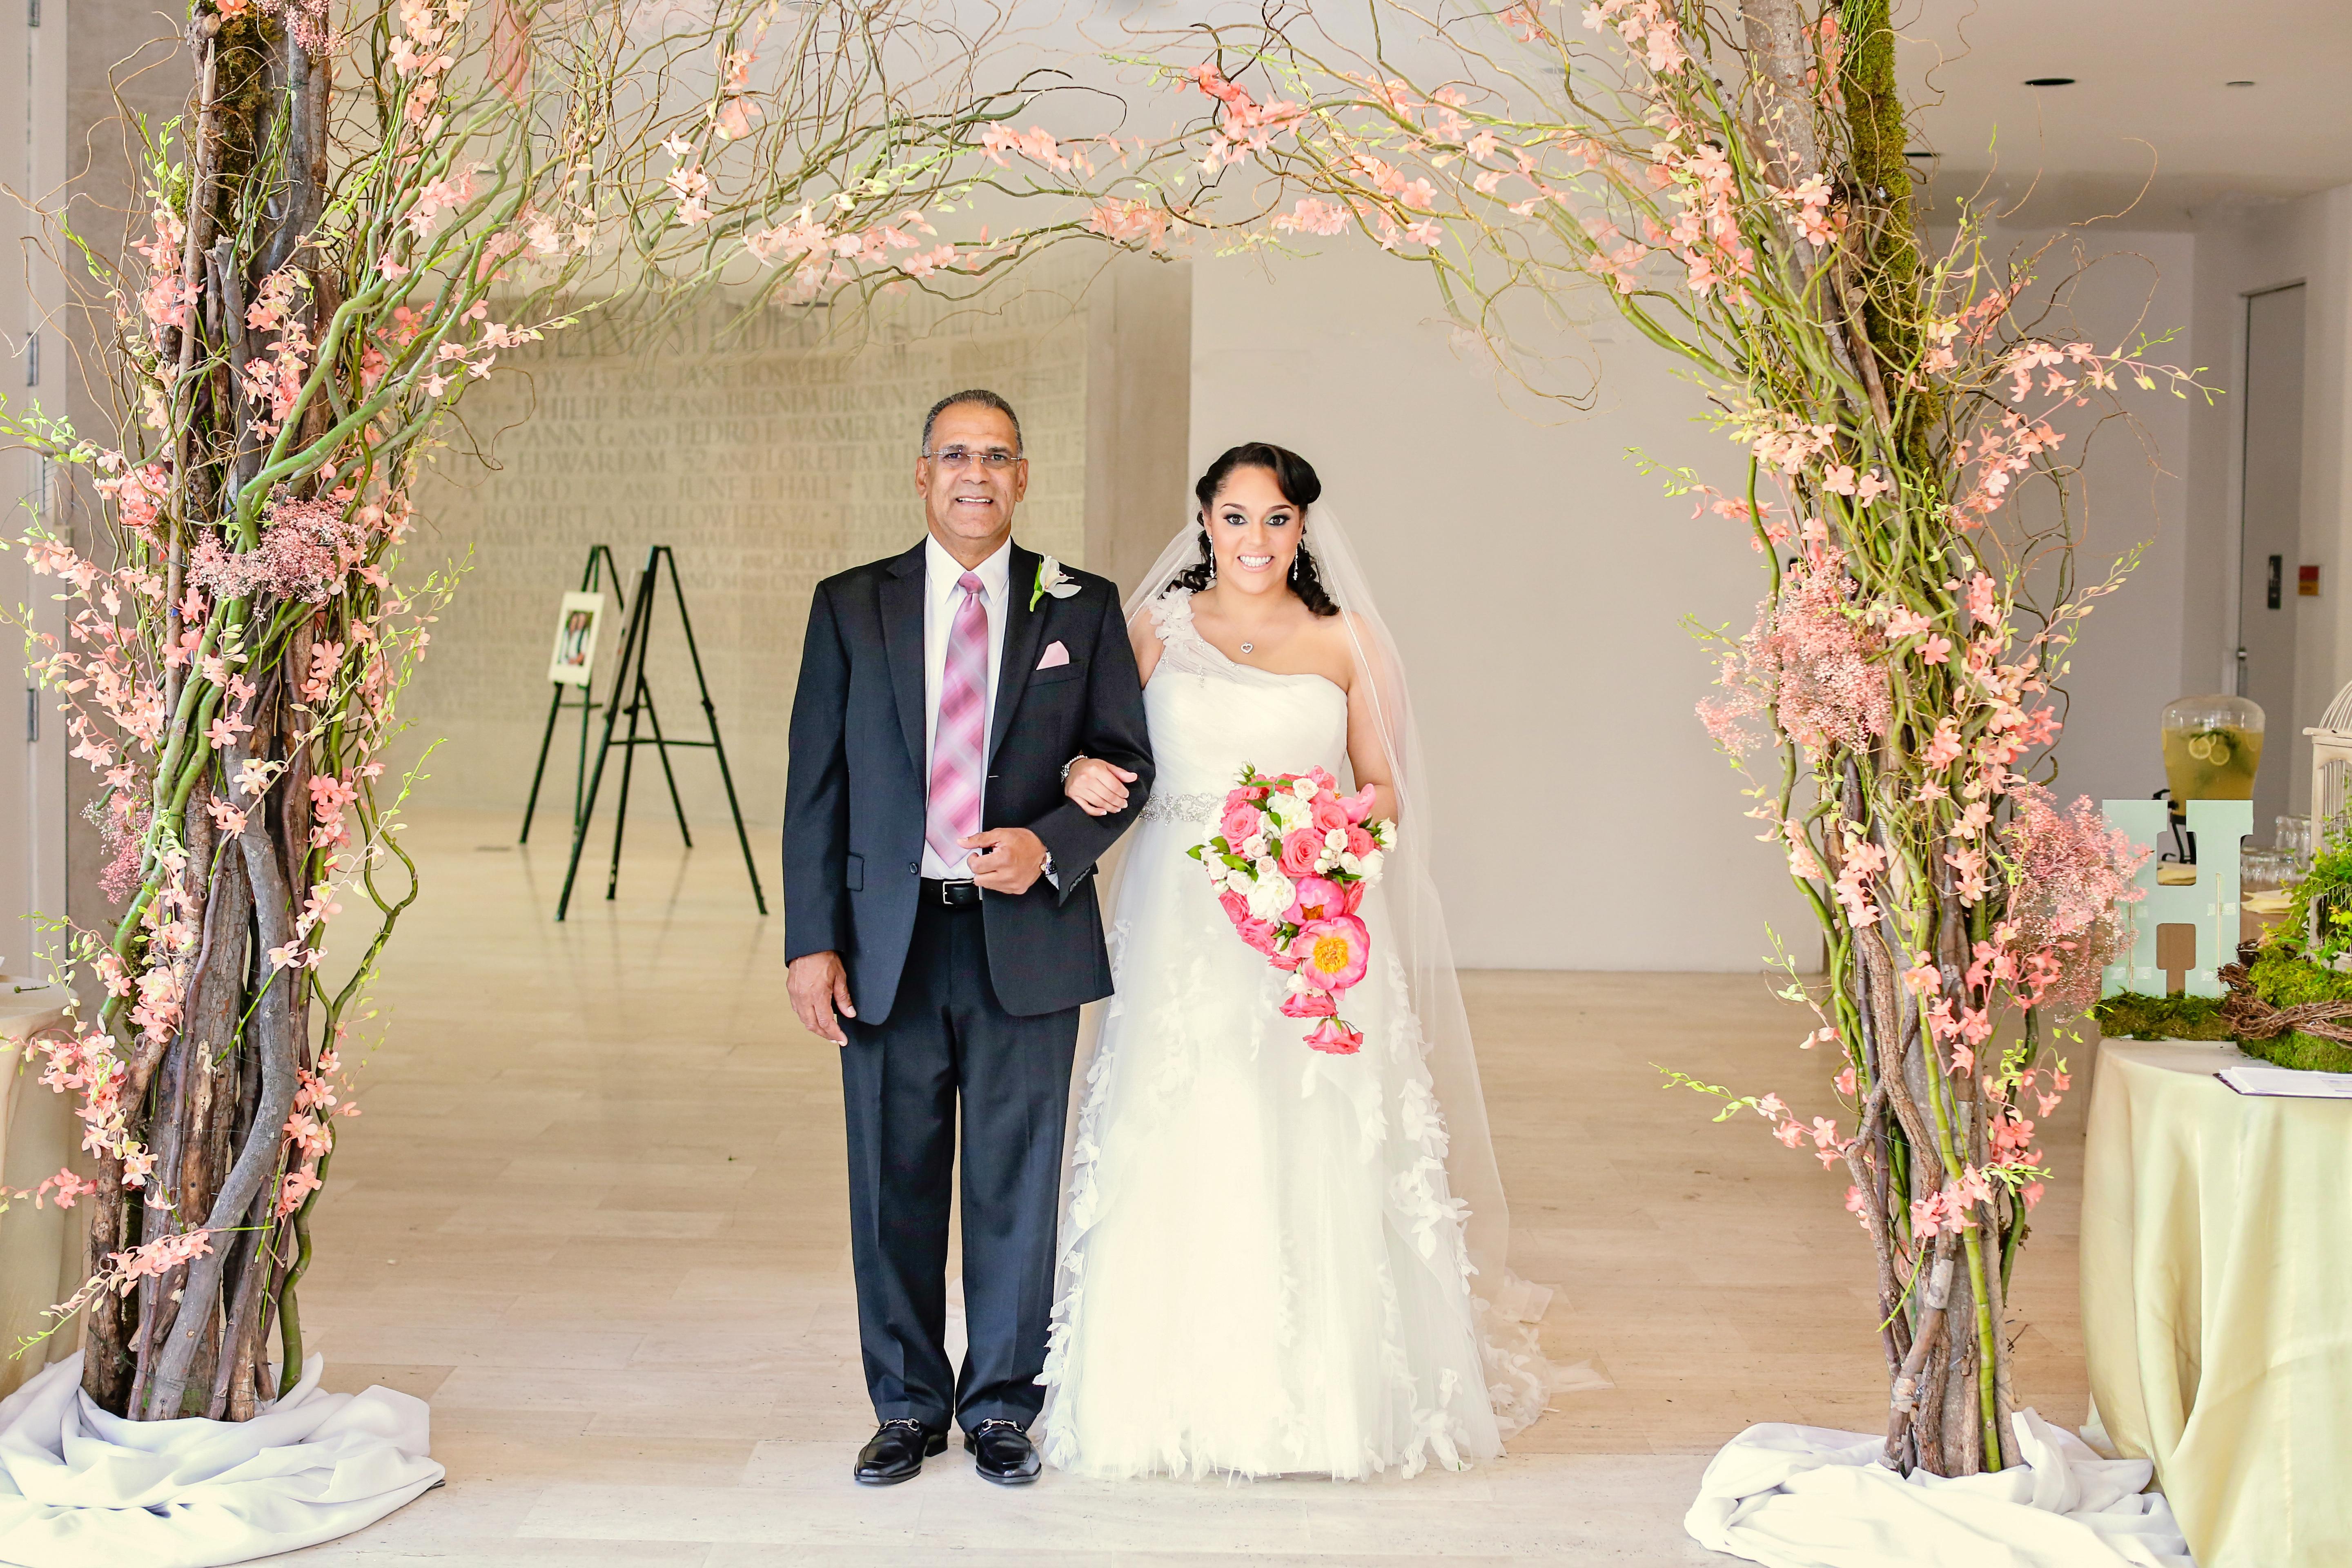 Bride with father walking under floral arch